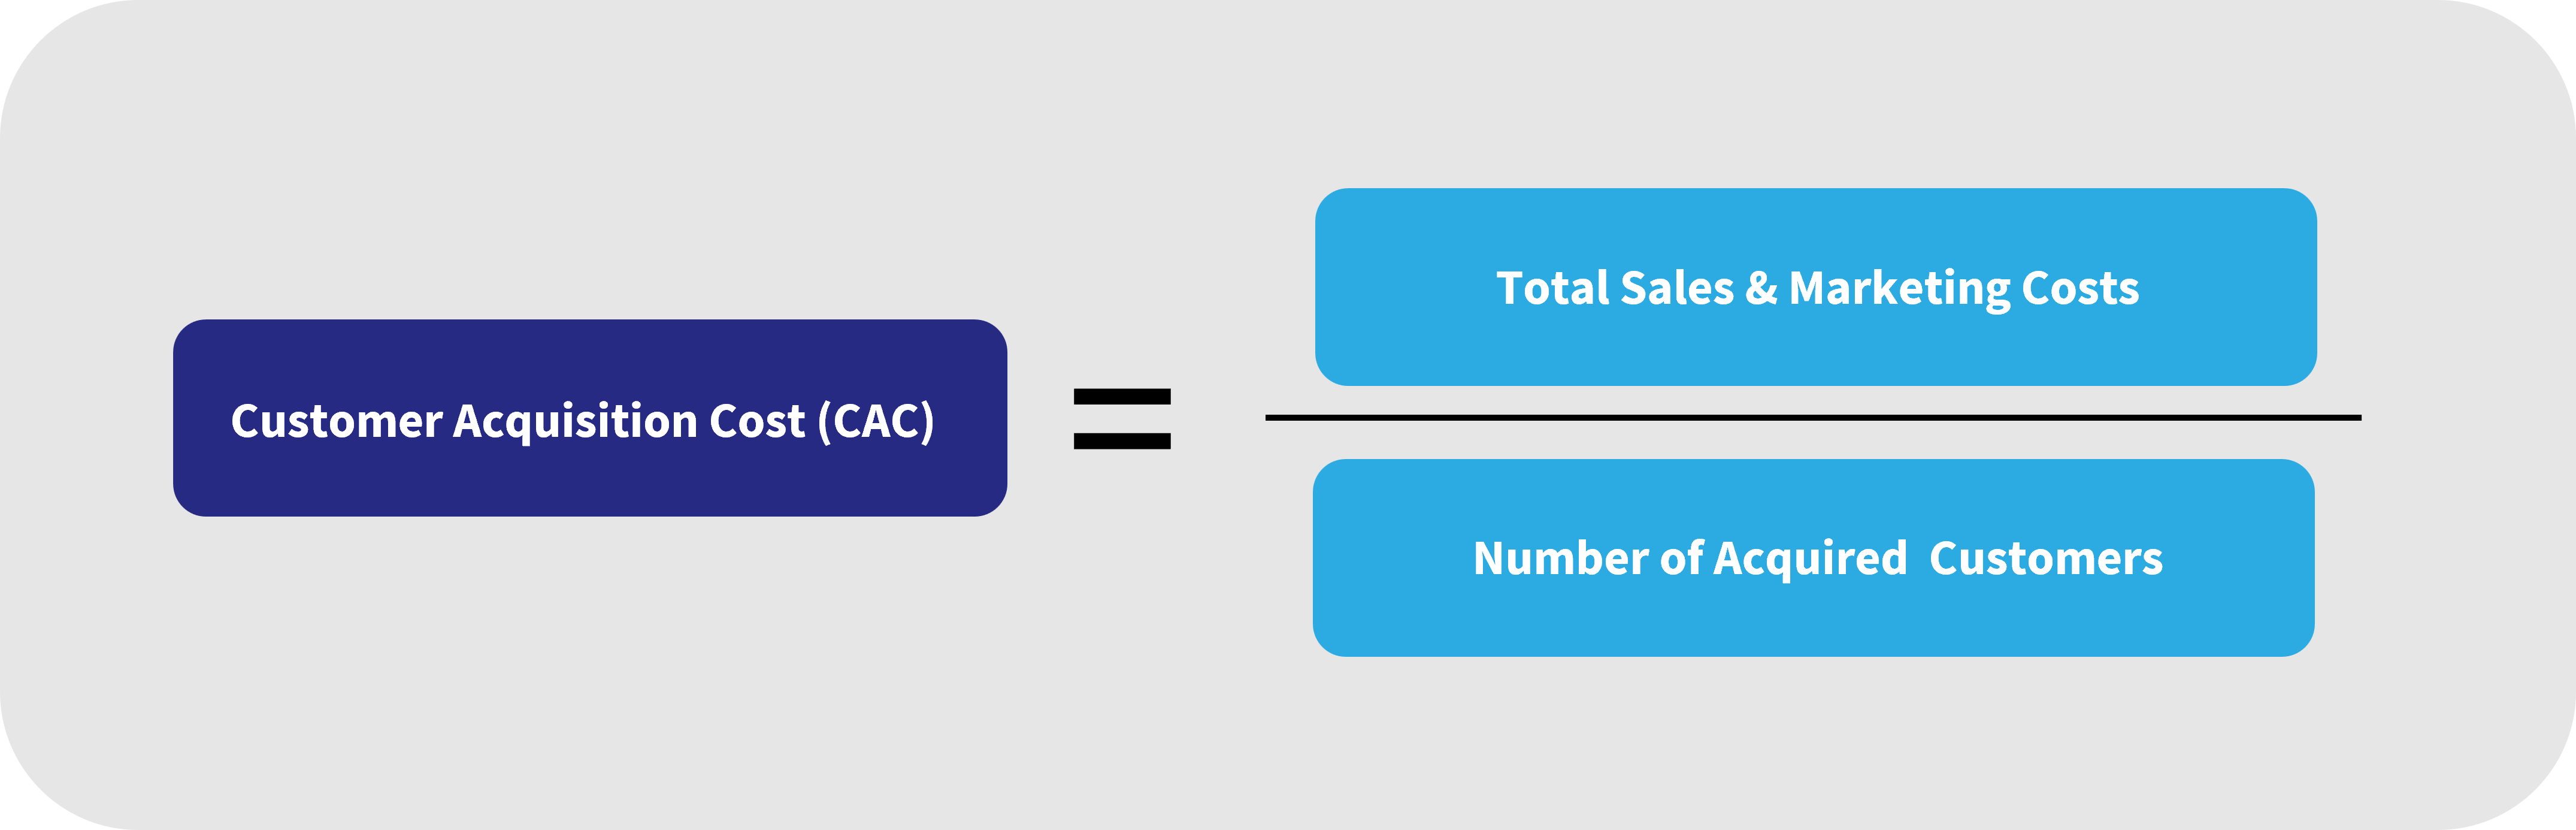 Customer Acquisition Cost = Total Sales & Marketing Costs / Number of Acquired Customers